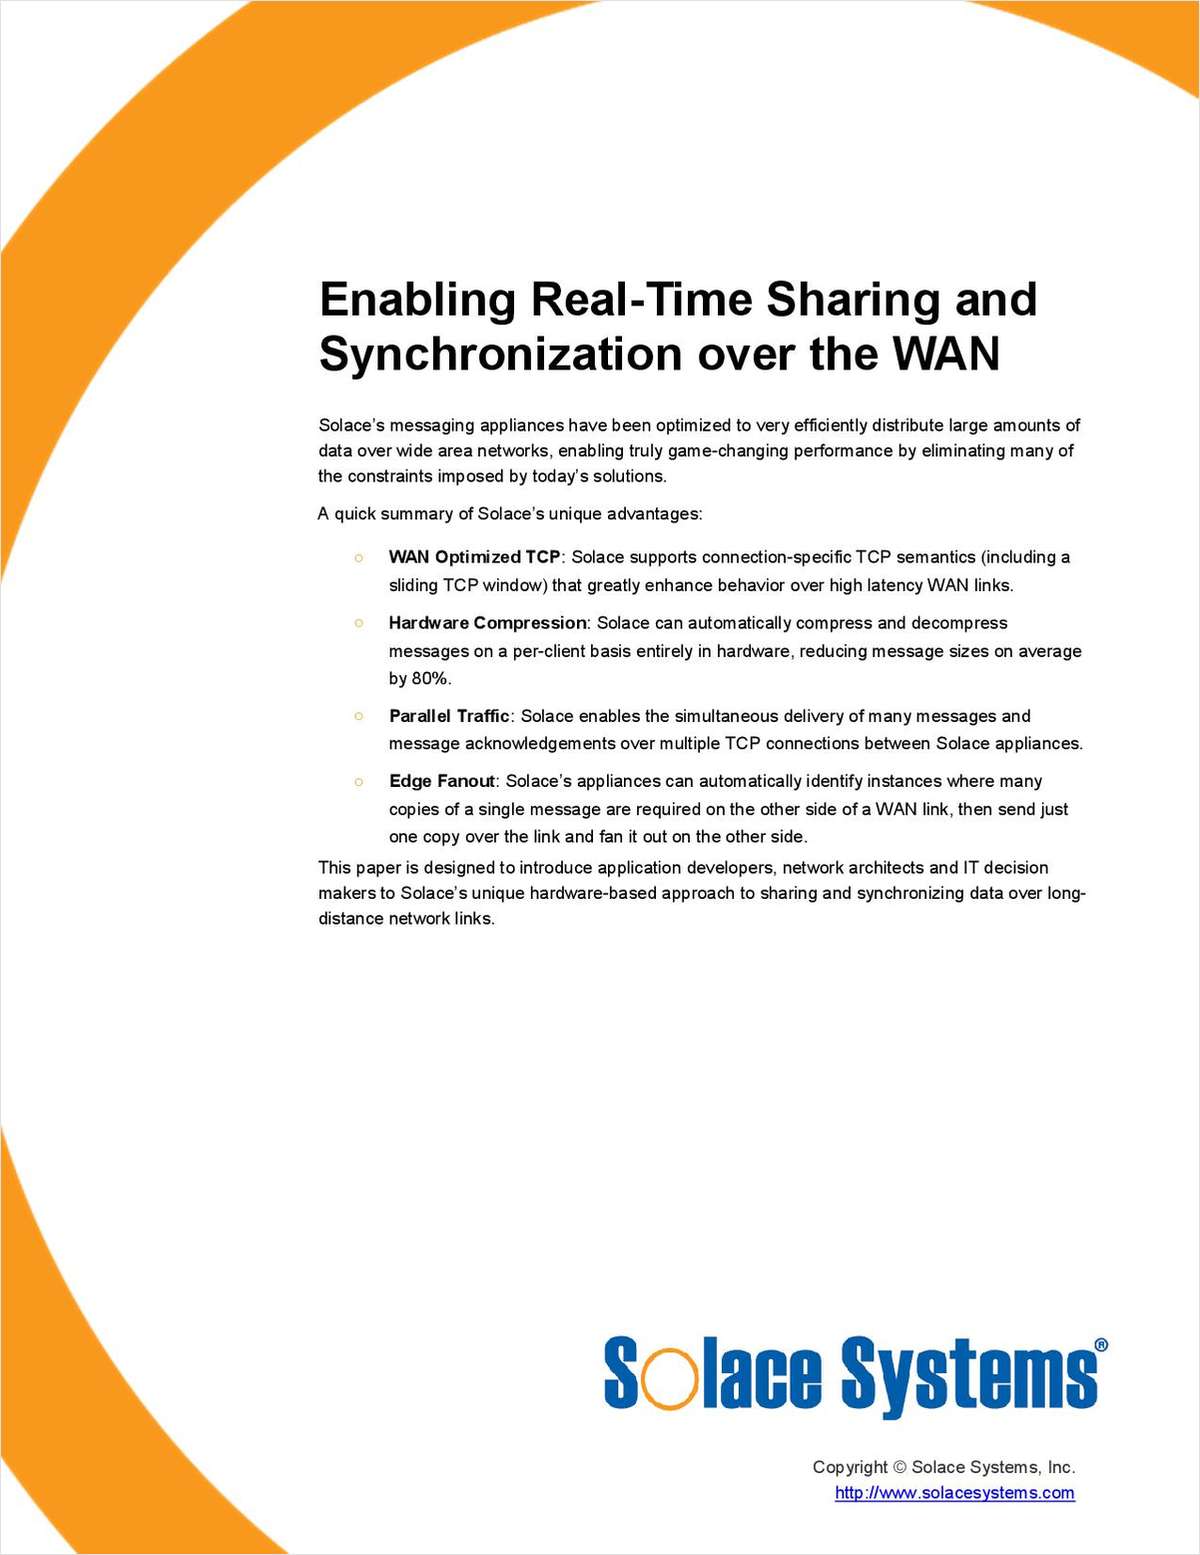 Enabling Real-Time Sharing and Synchronization over the WAN